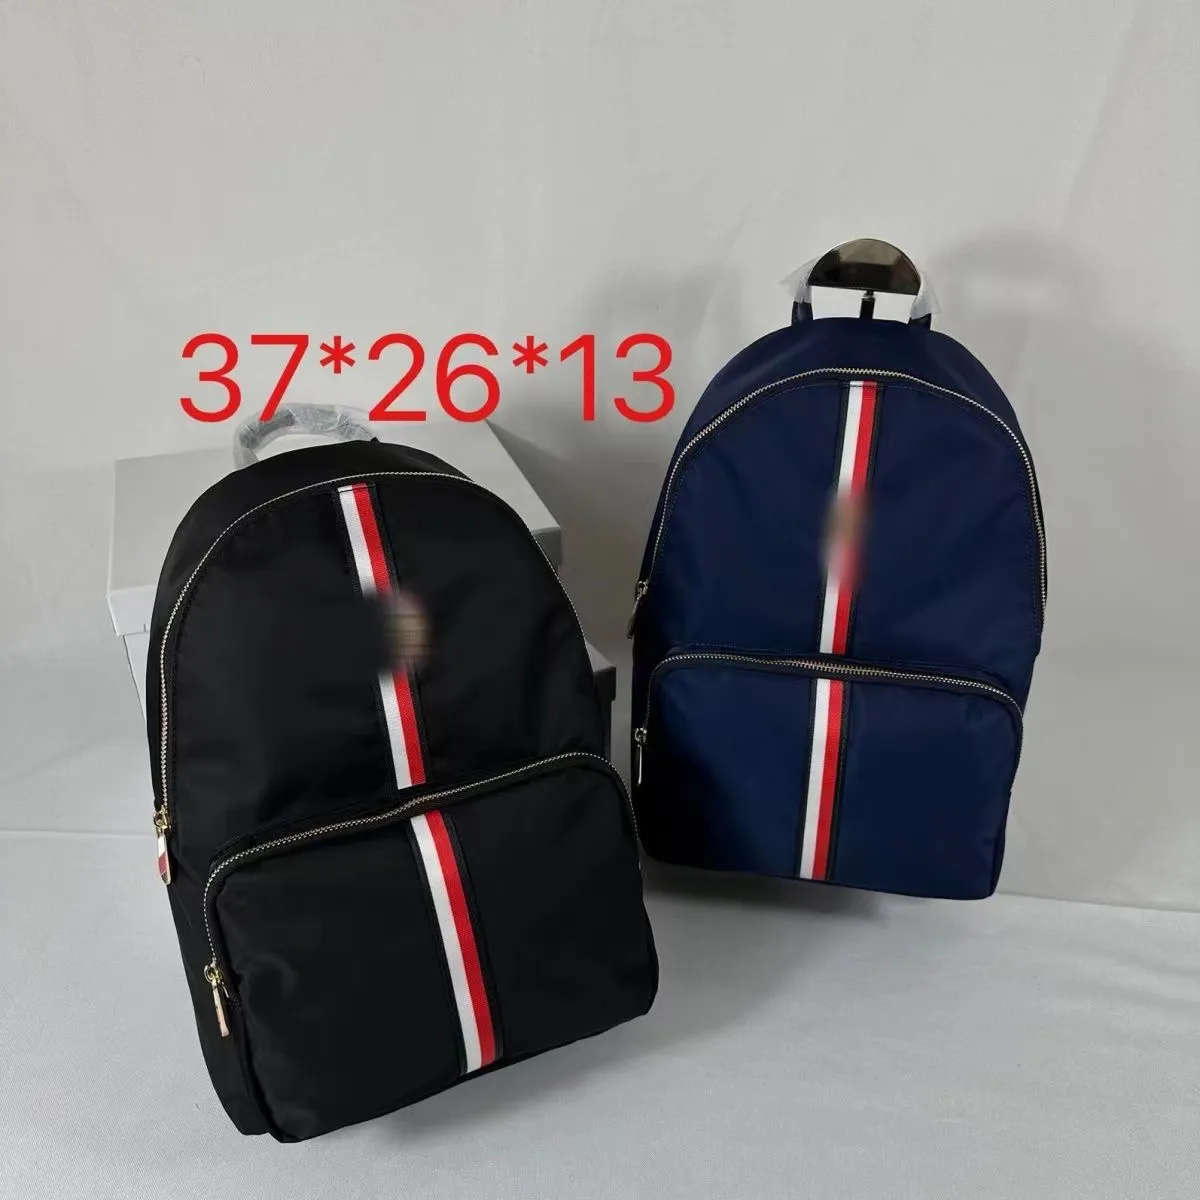 Designer bag new women's casual colored commuter backpack